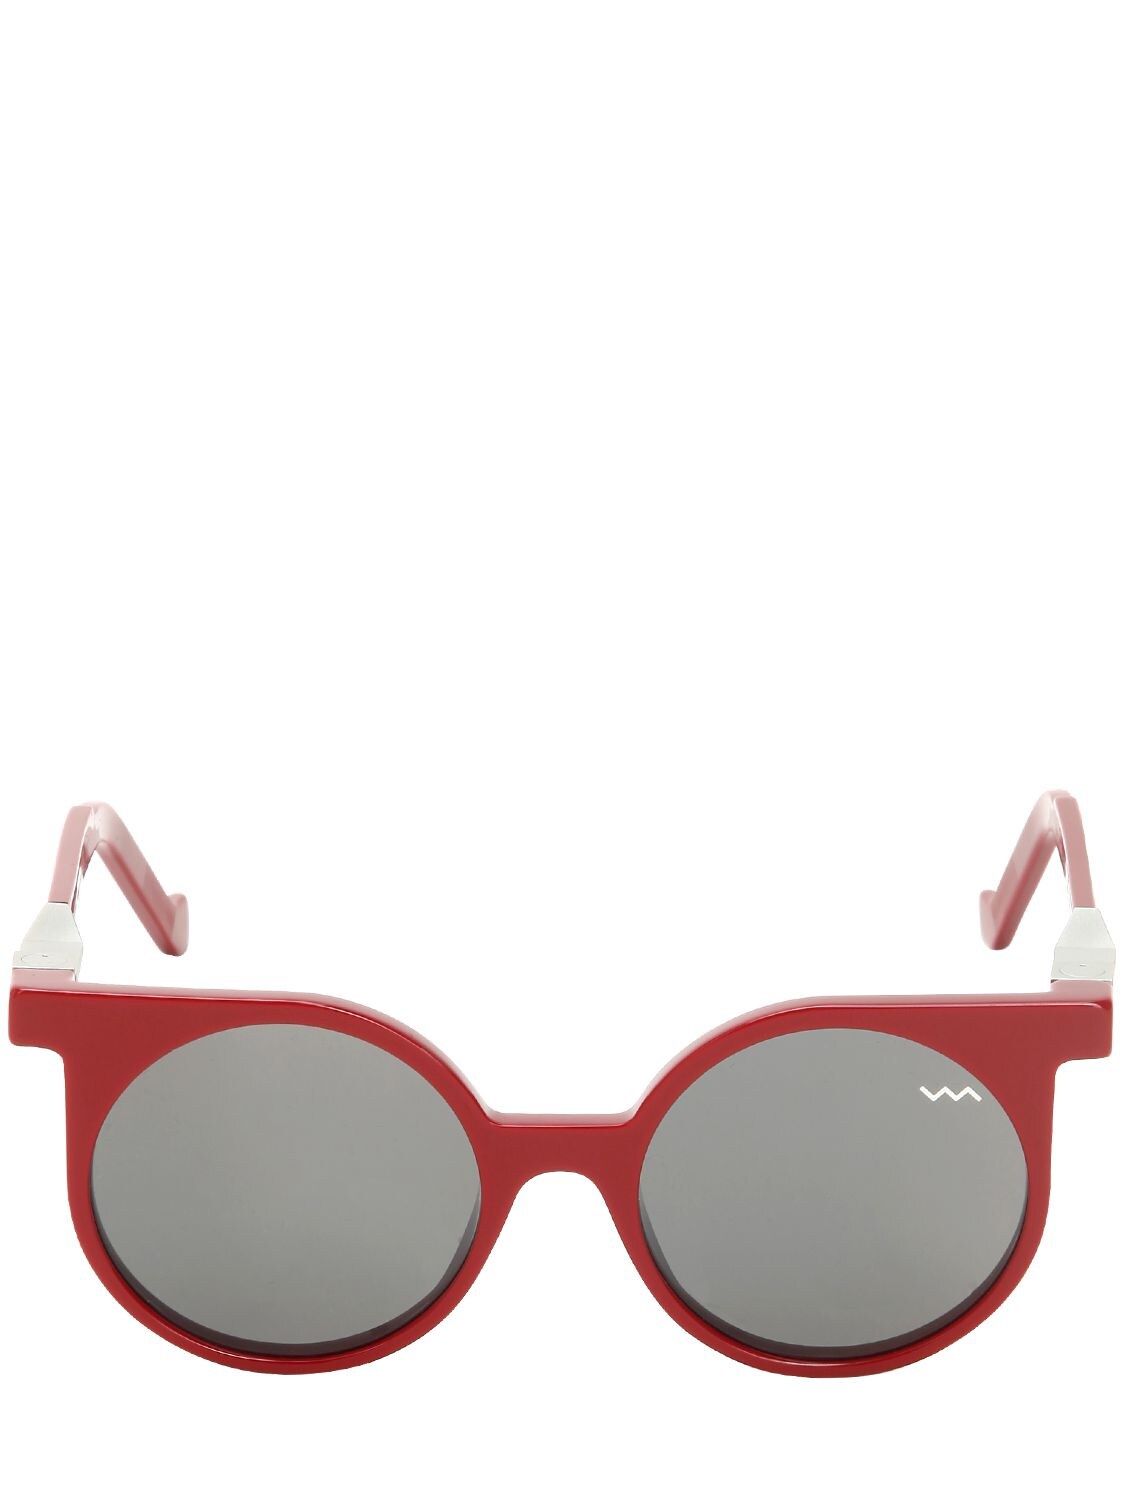 Vava Round Frame Sunglasses In Red